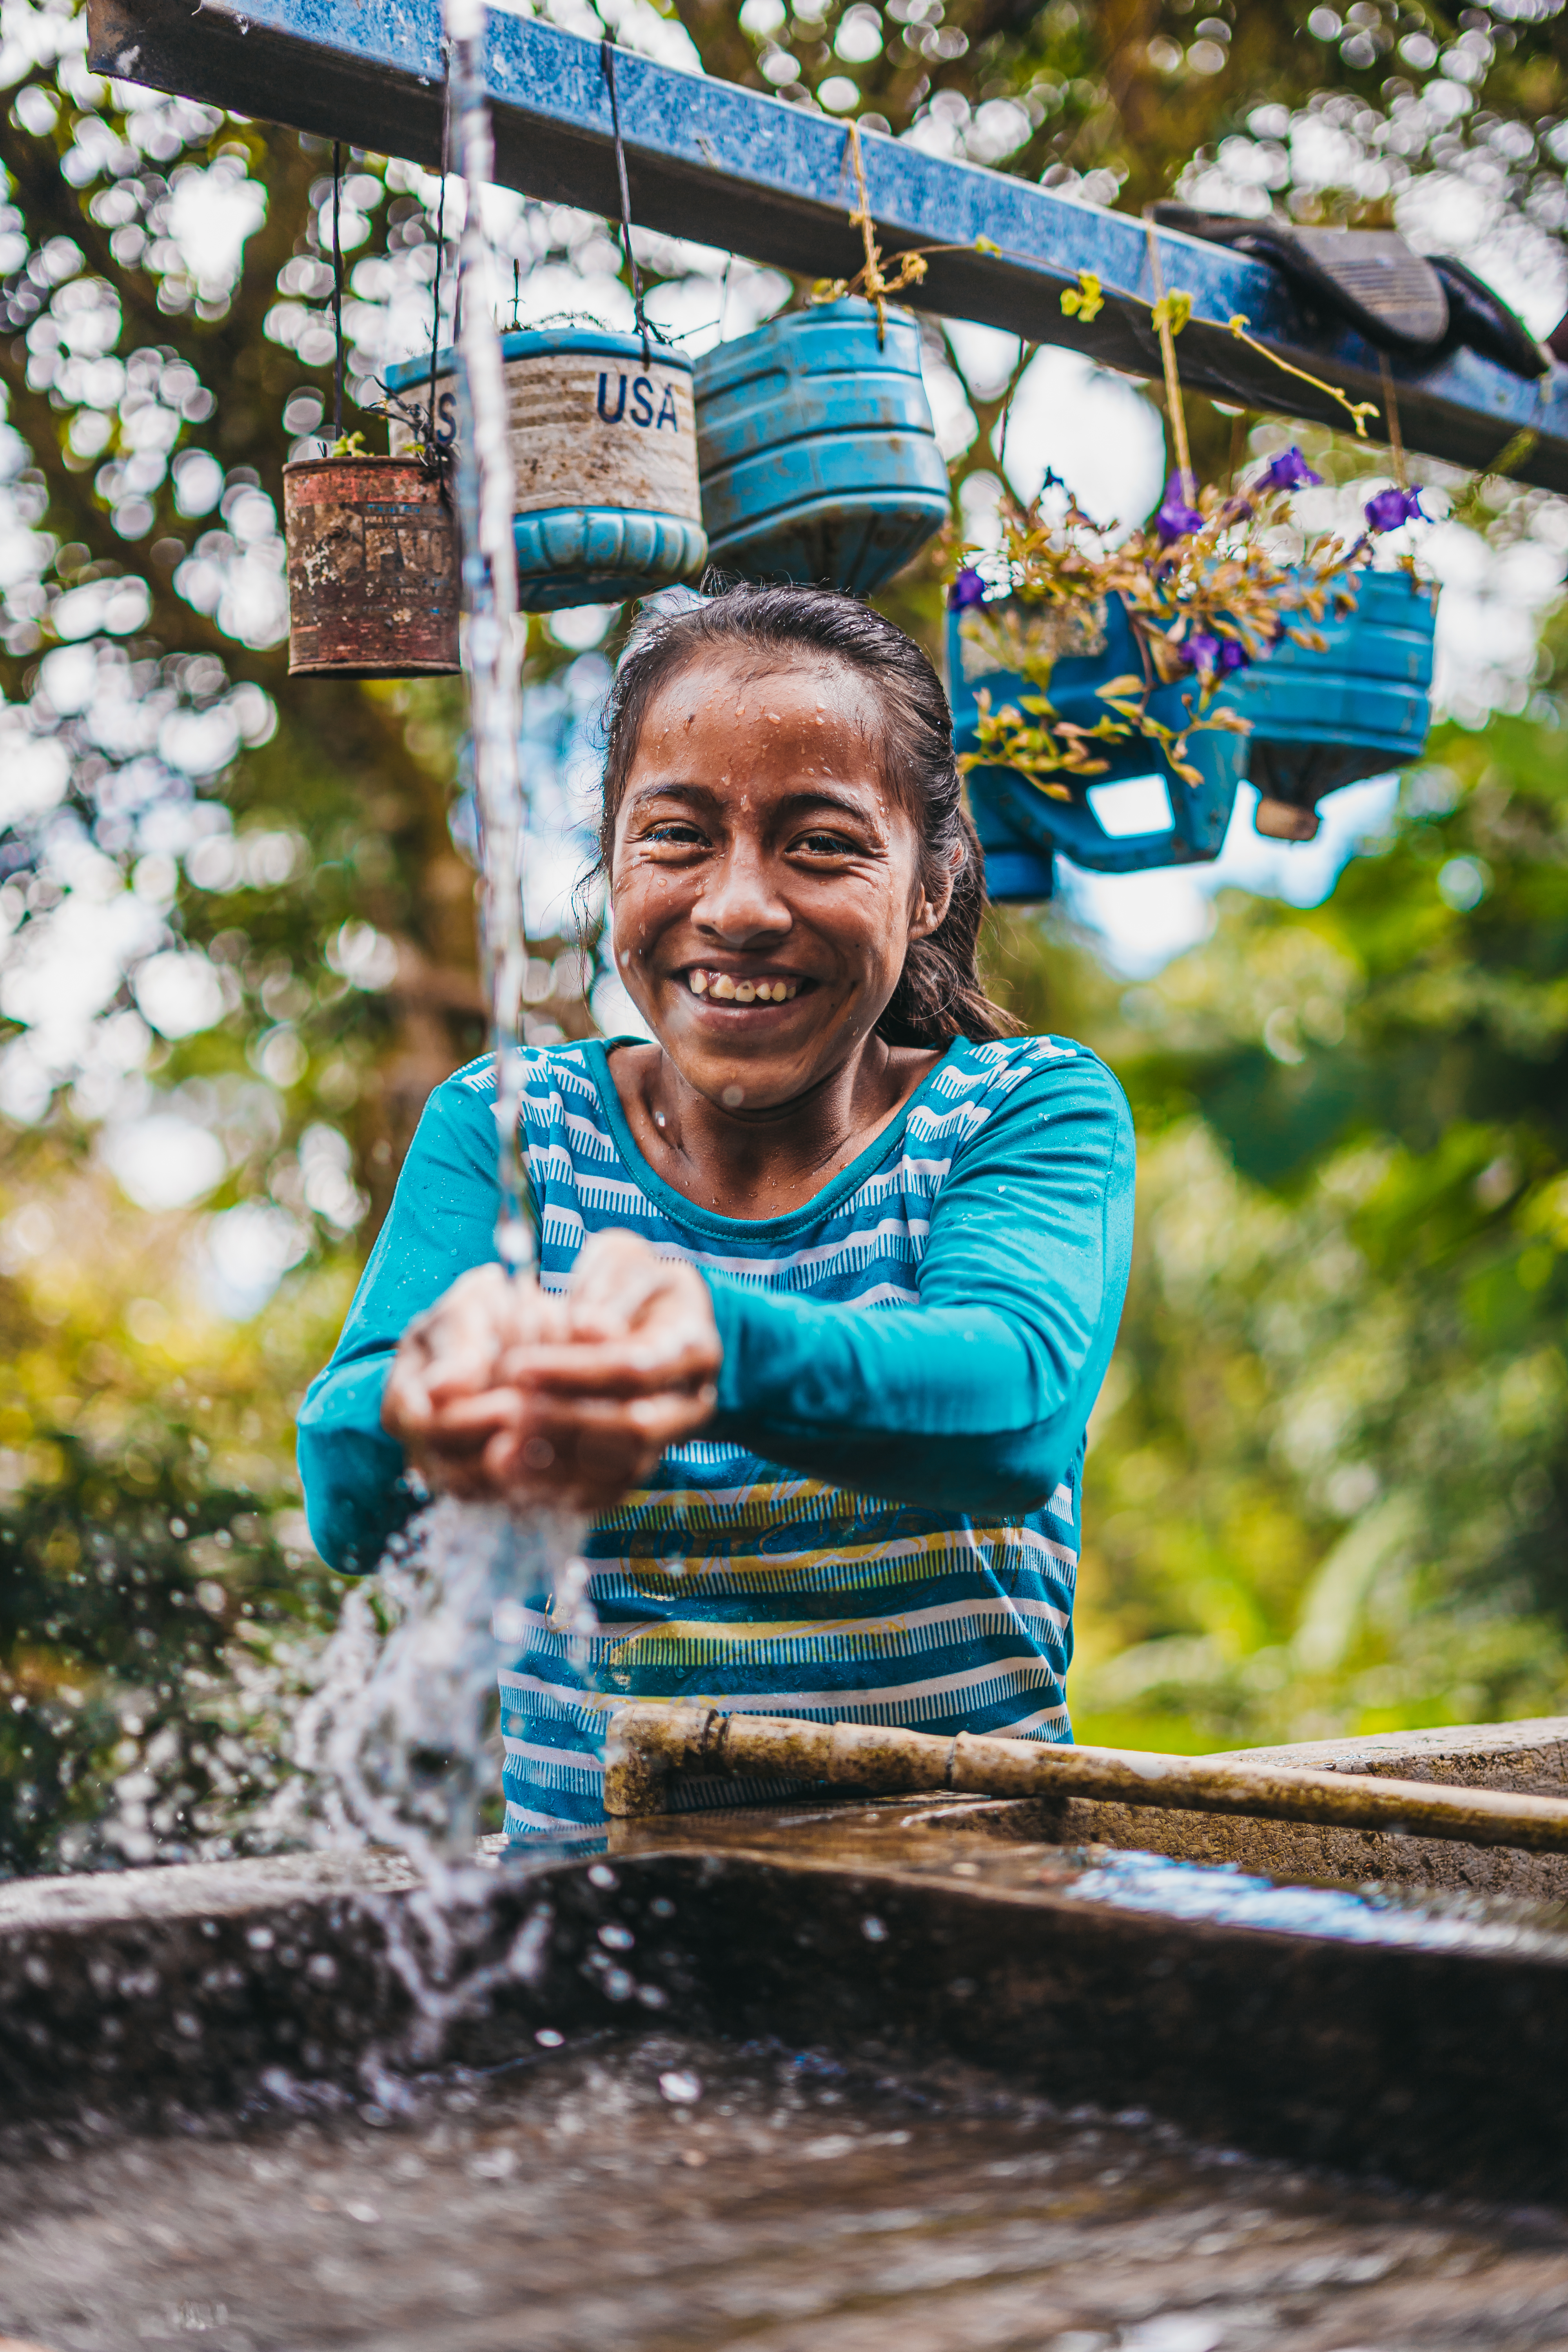 A teenage girl smiling, washing her hands in clean water under an outdoor tap.